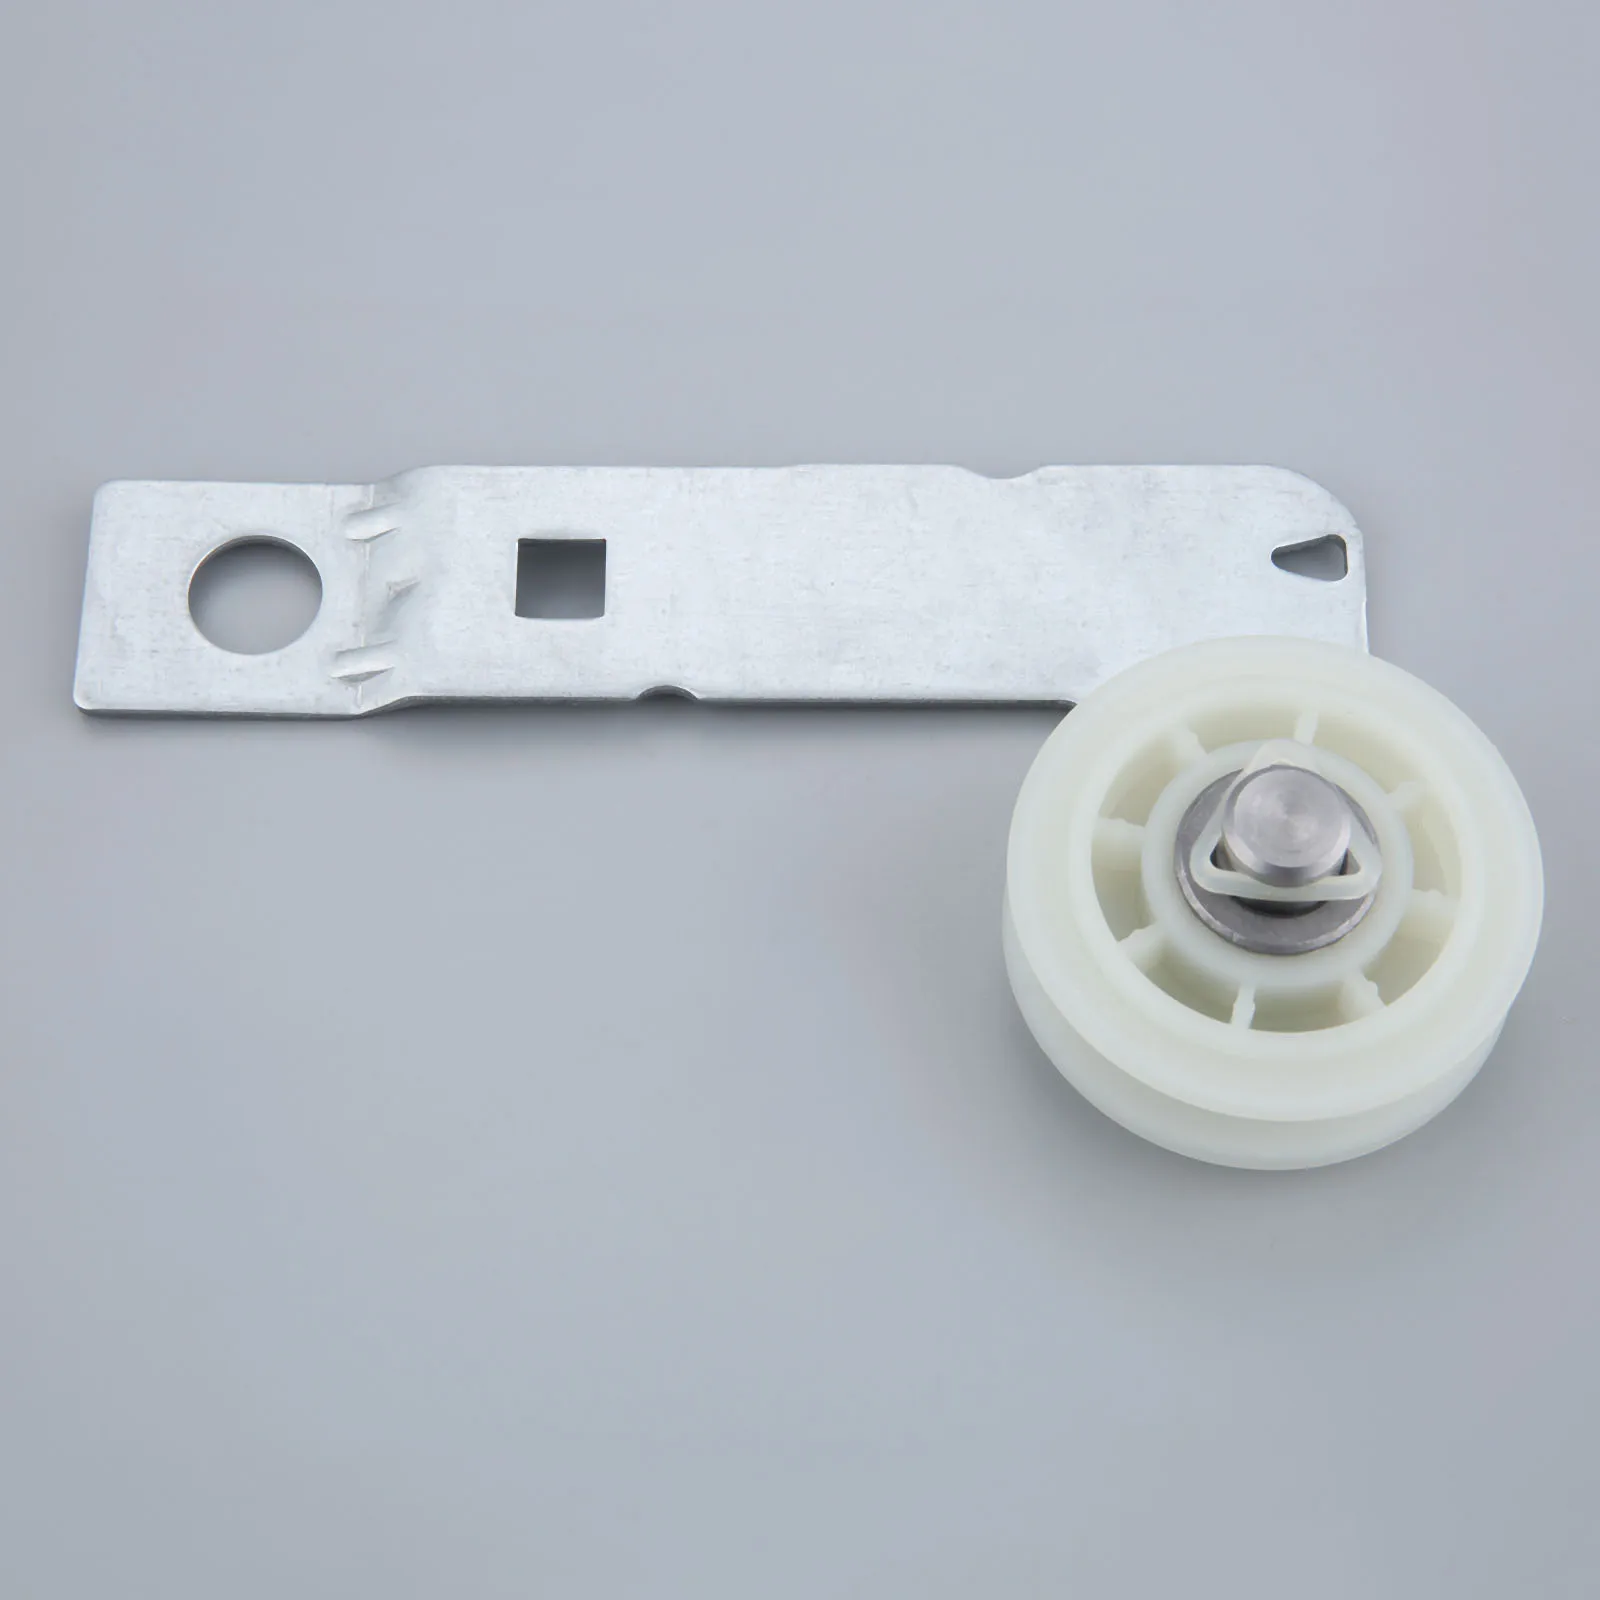 Maytag W10837240 Dryer Idler Pulley with Bracket KitchenAid Kenmore W10118754 Replace Parts # 279640 W10118756 W10547290 PS11726337 3387372 3388674 Replacement Part Fit for Whirlpool 